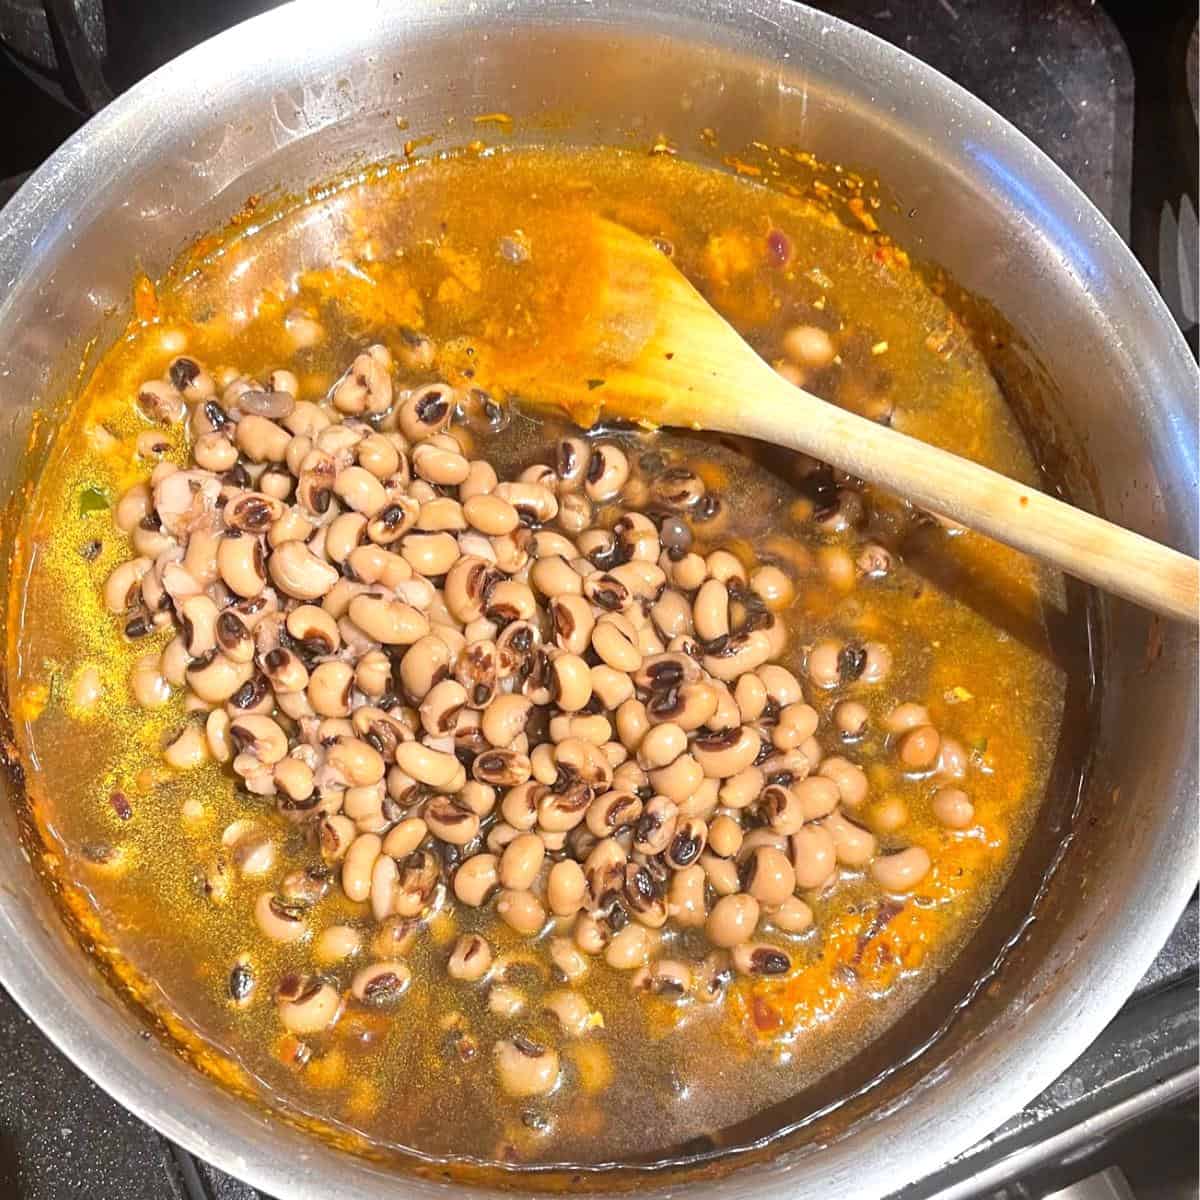 Black eyed peas and stock added to saucepan with masala spices.